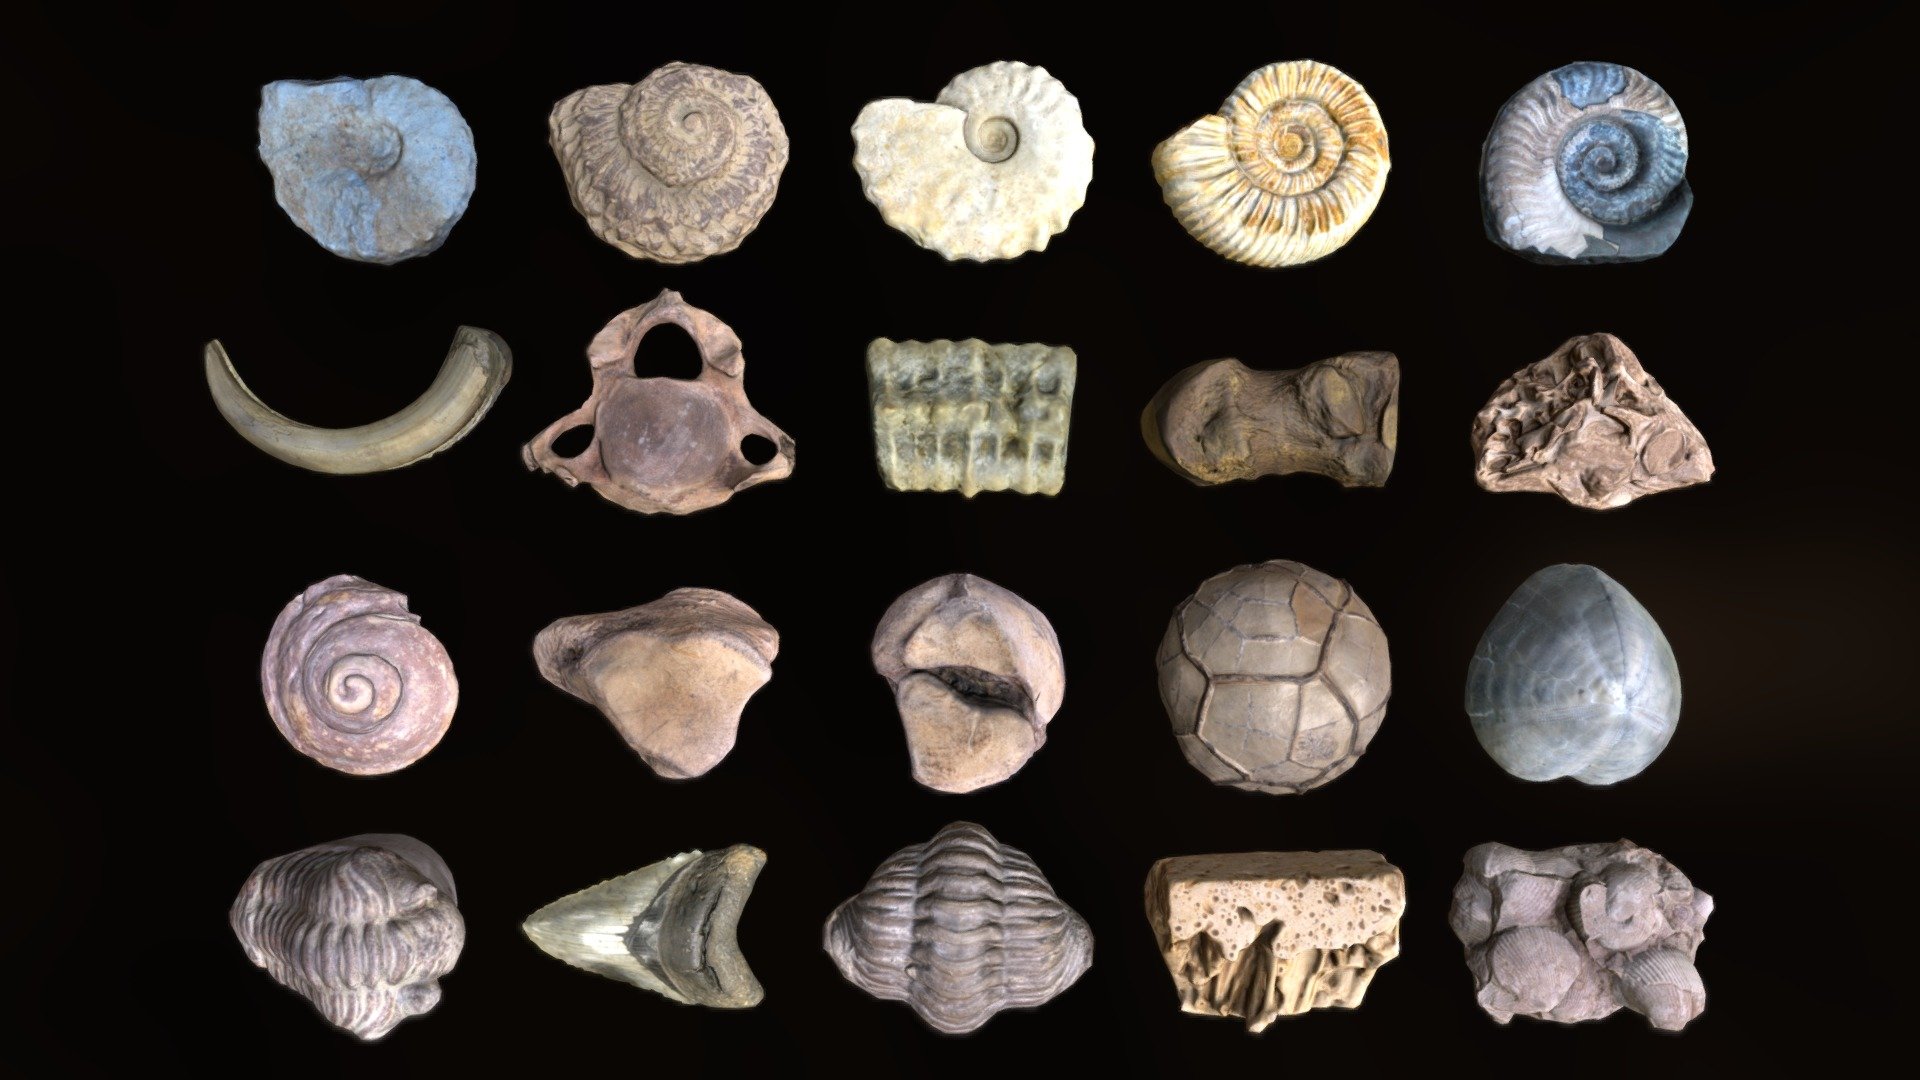 CC-Attribution - Non Commercial

A collection of reprocessed fossils (other free assets here), ready to use as game props, particles or for optimized renderings, but &ldquo;sadly